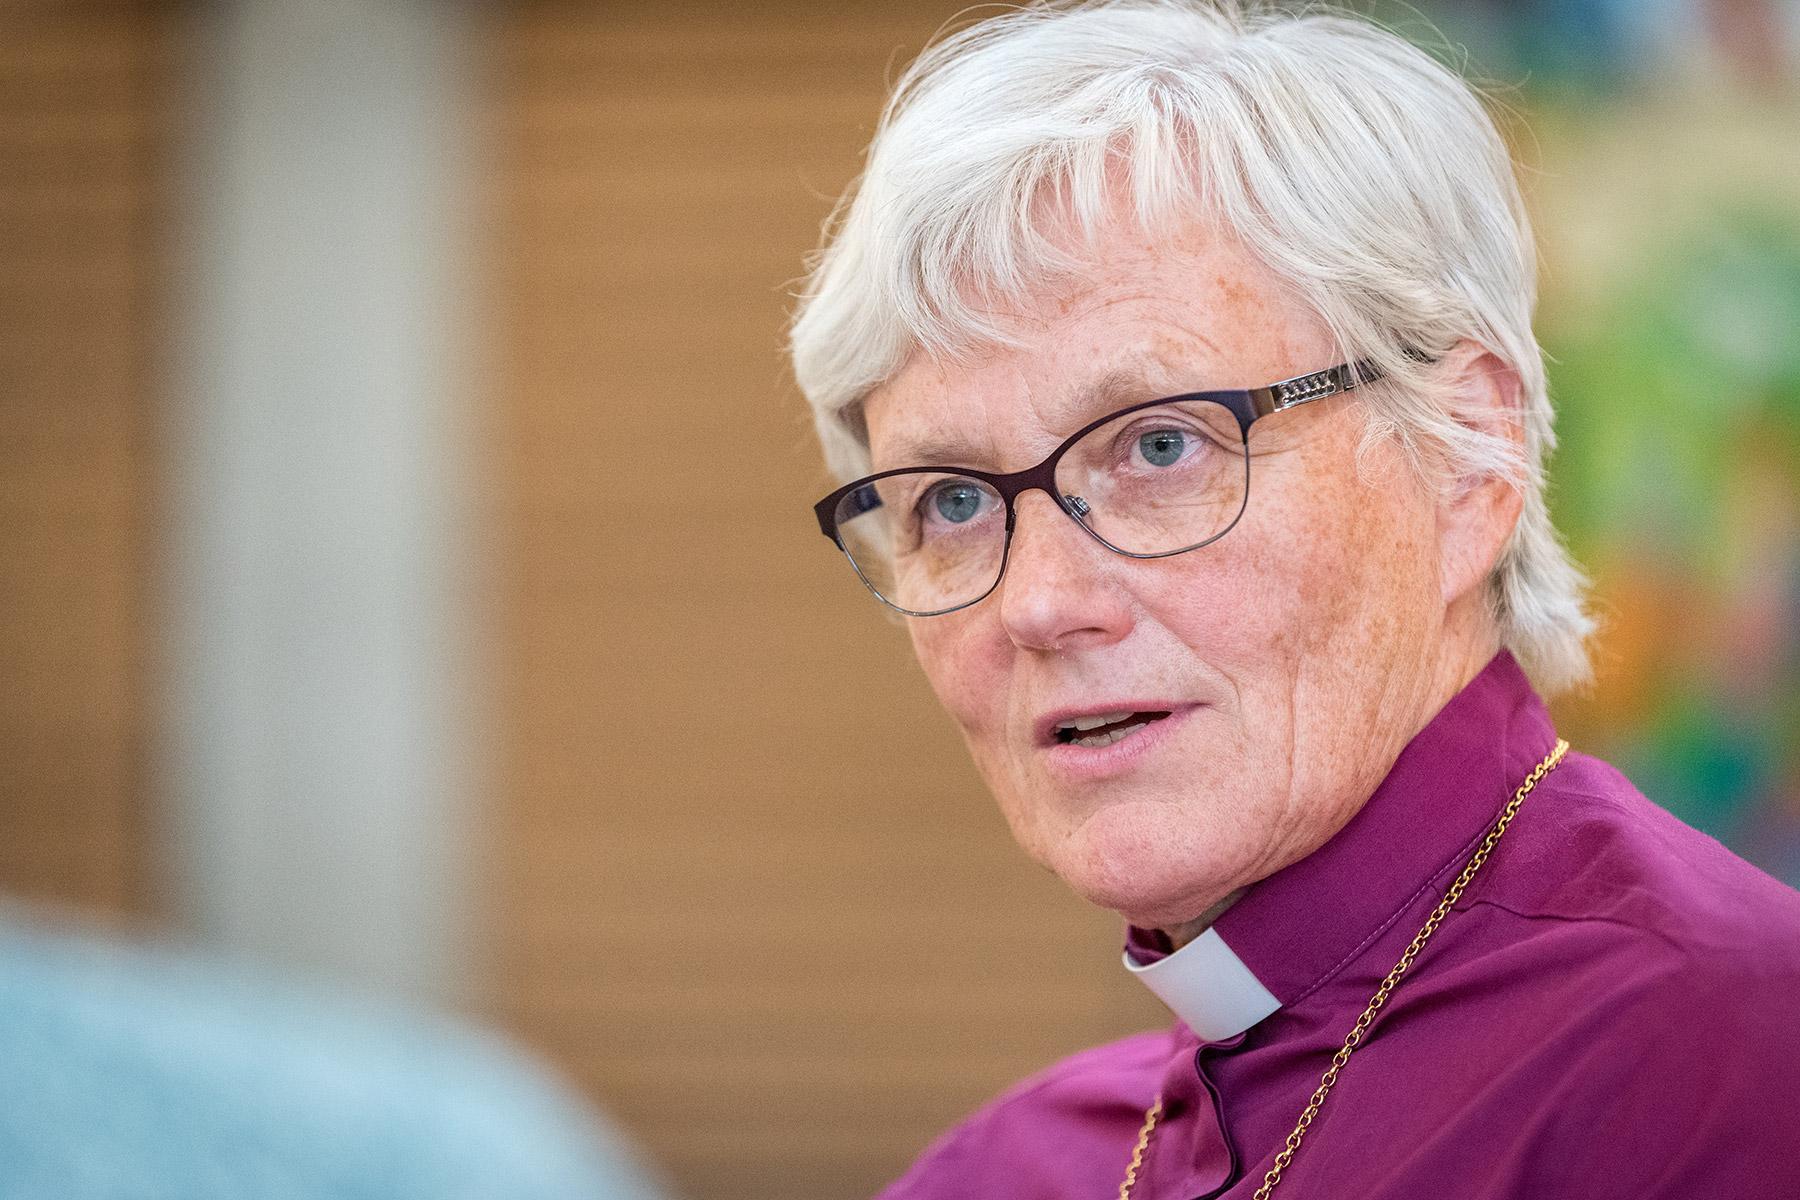 Rev. Dr Antje JackelÃ©n, Archbishop of the Church of Sweden and LWF Vice-President for the Nordic region. Photo: LWF/A.Hillert